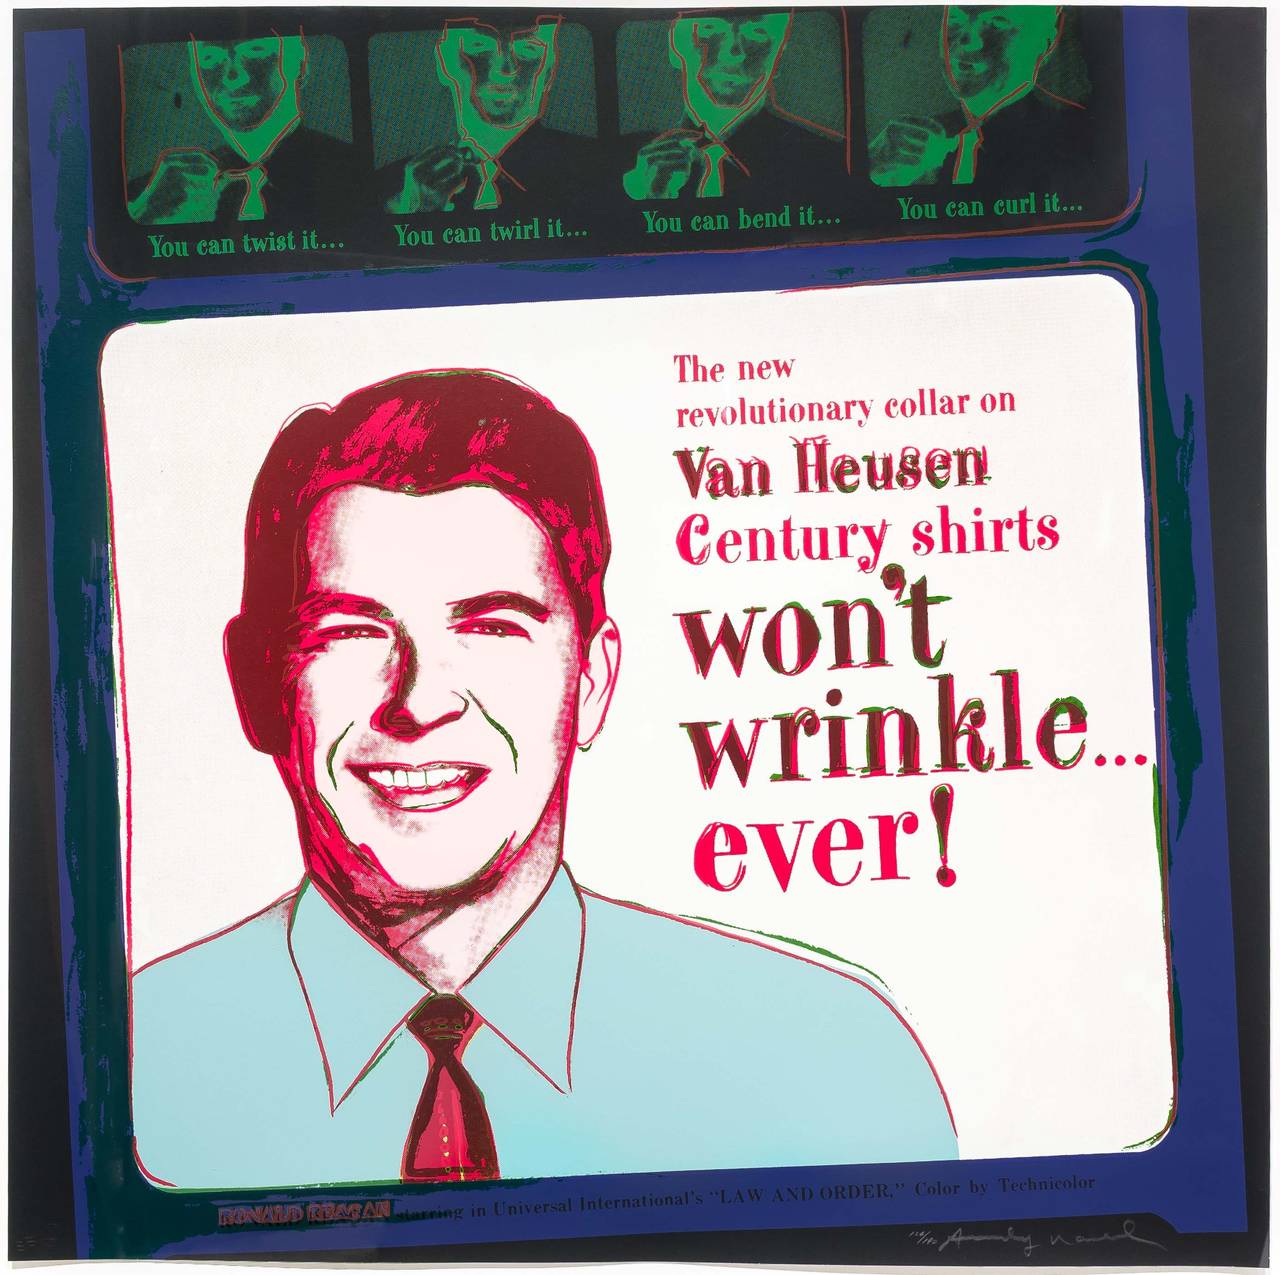 Van Heusen (Ronald Reagan), from Ads - Print by Andy Warhol